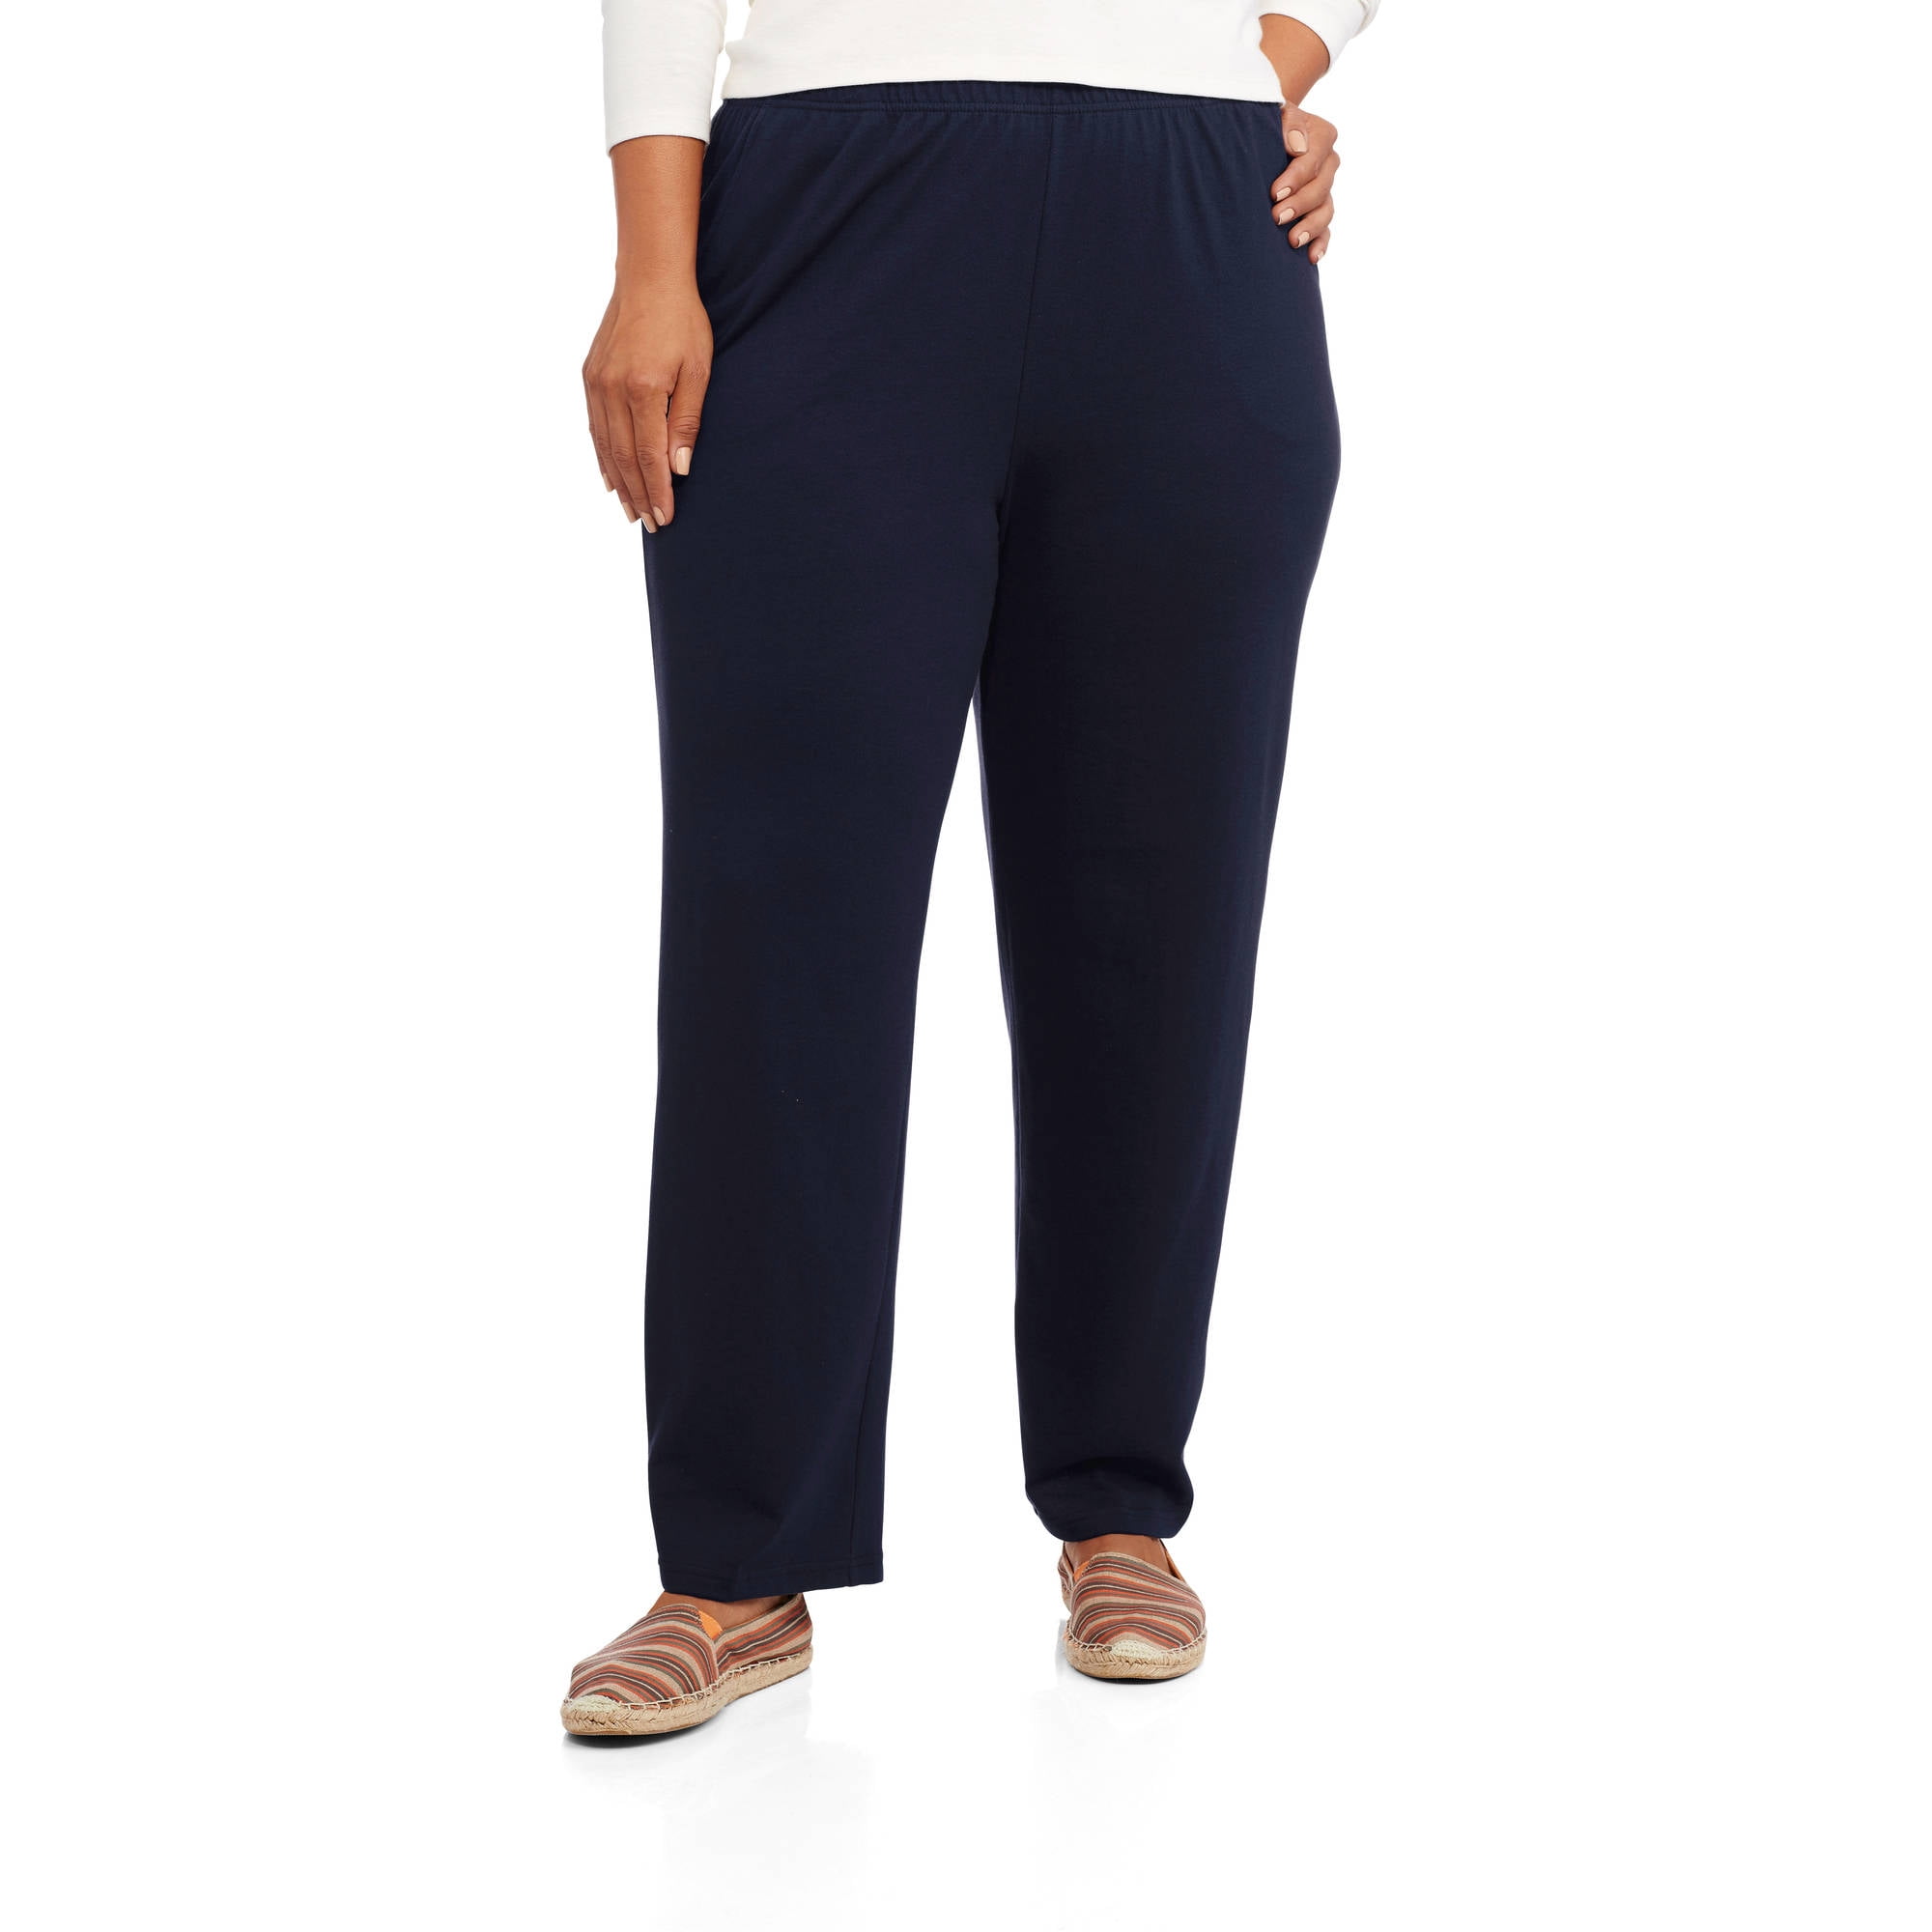 Women's Plus Size Knit Pull On Pants, Available in Regular and Petite  Lengths - Walmart.com